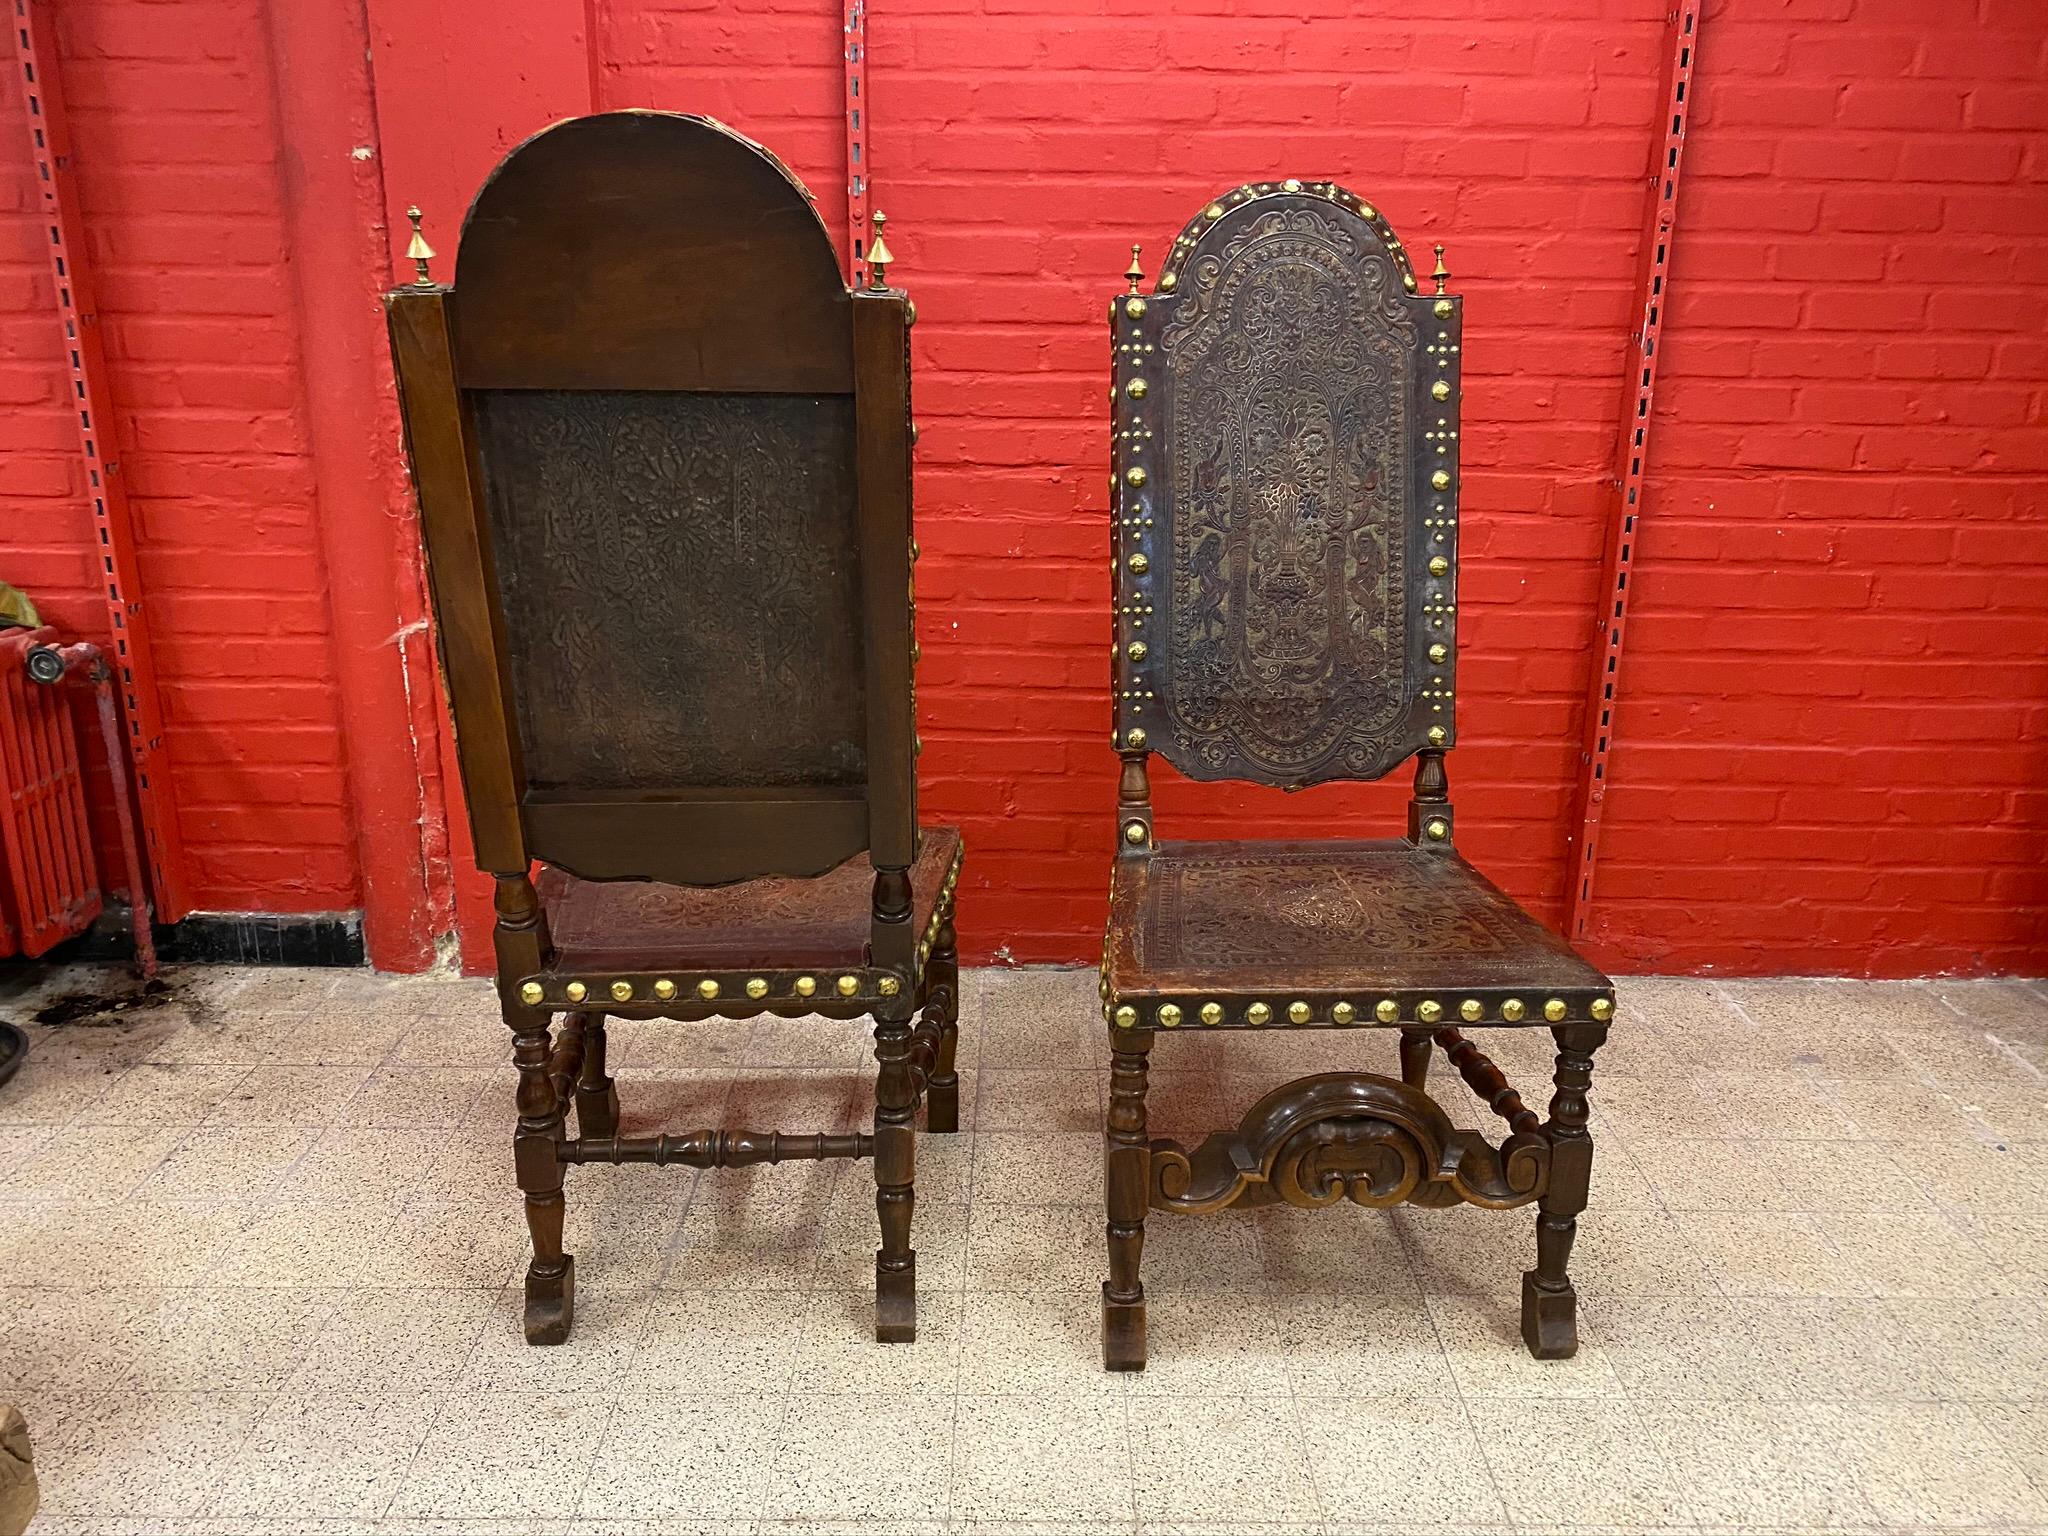 3 High-Backed Chairs, Cordoba Leather Trim with Native American Decor, Spain For Sale 4